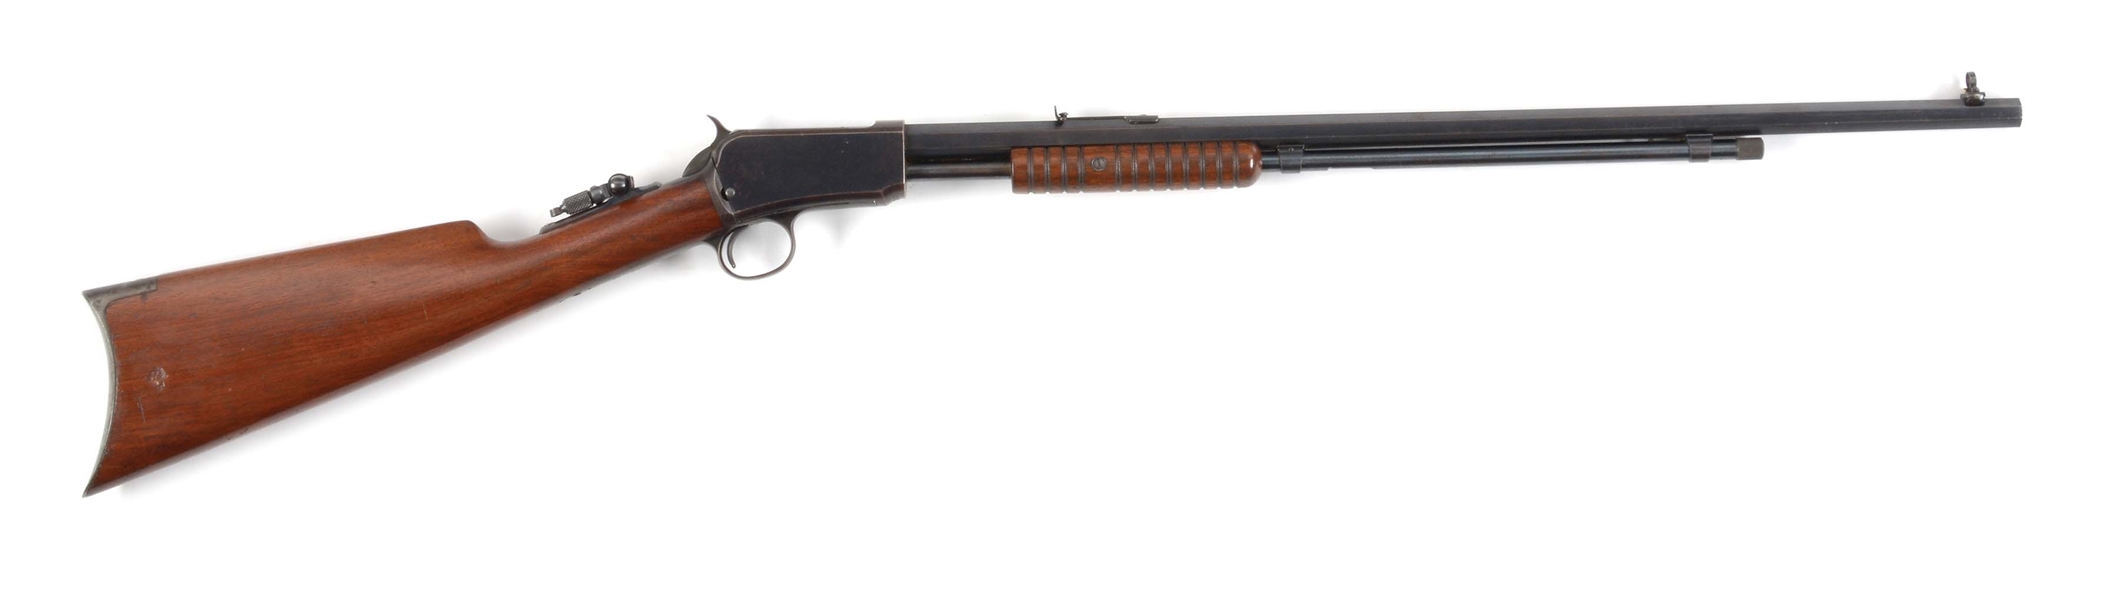 (C) WINCHESTER 1890 .22 LONG SLIDE ACTION RIFLE.